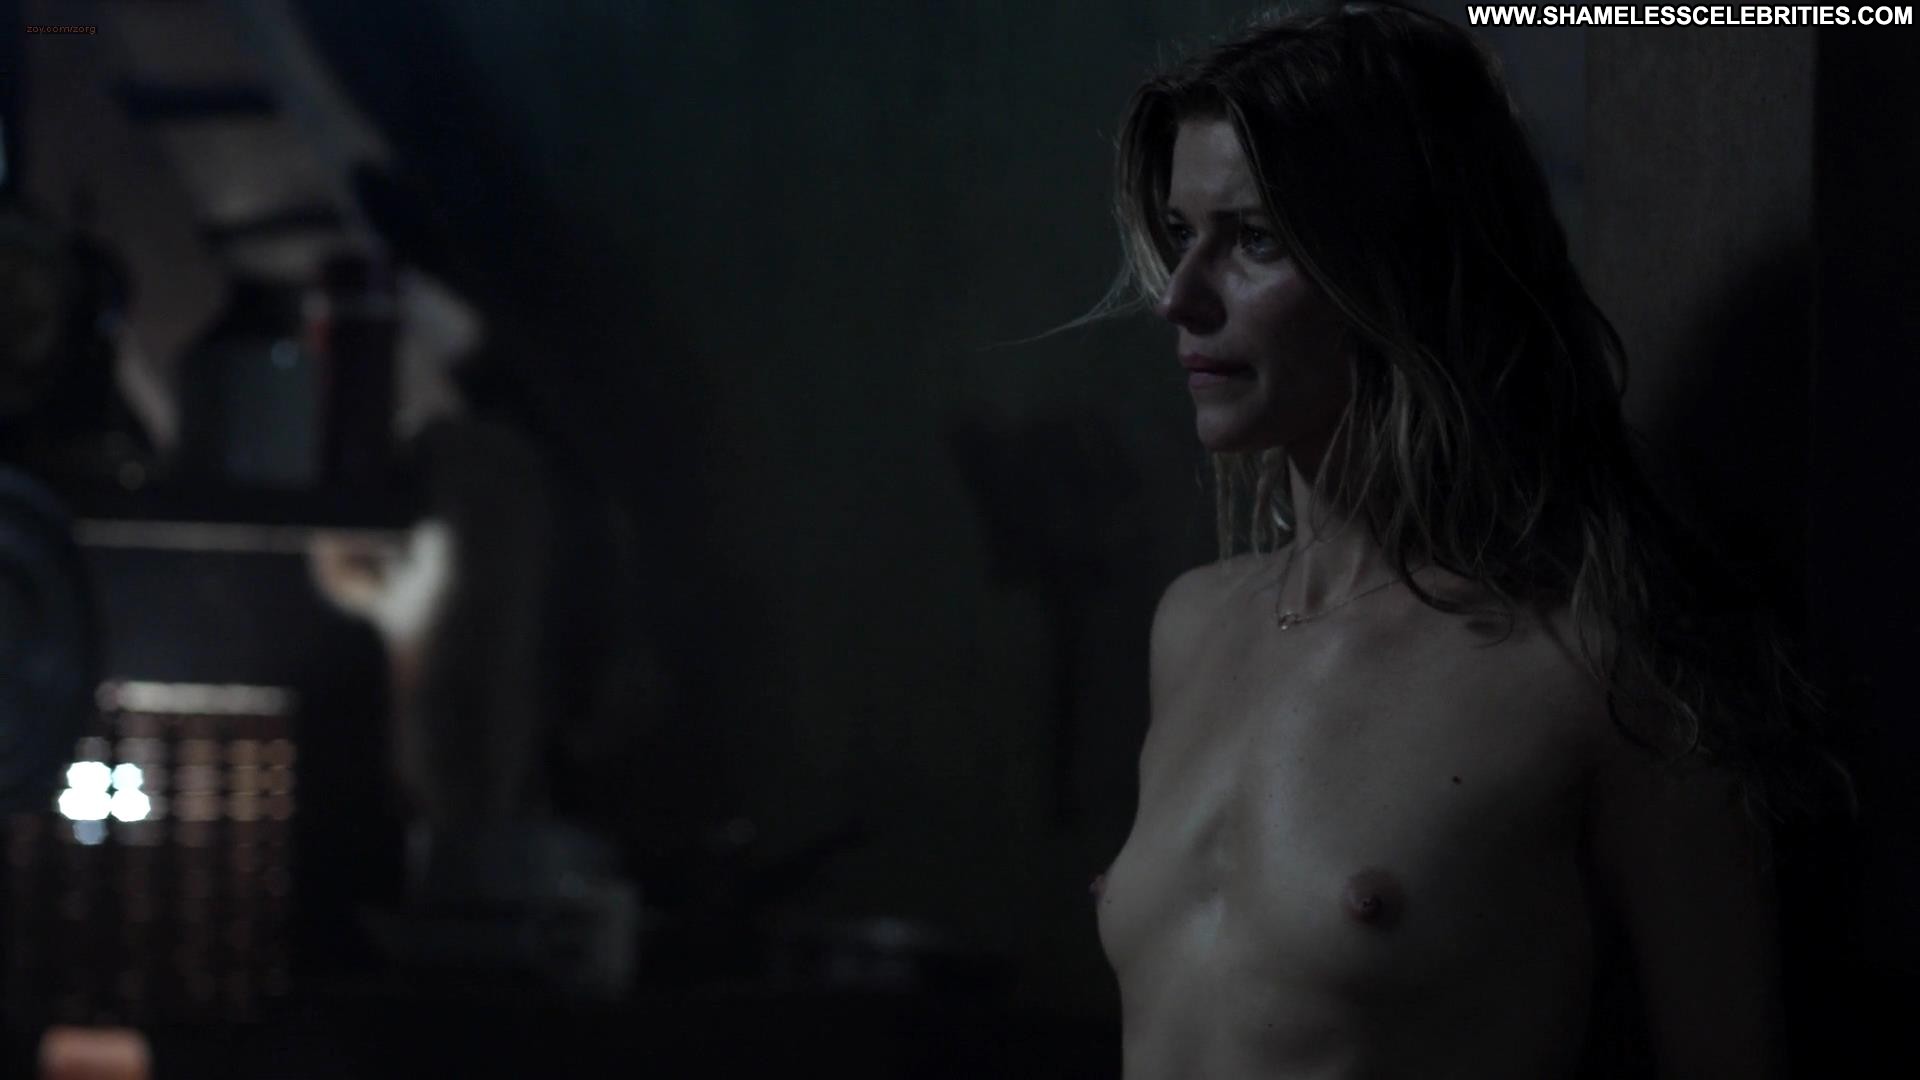 Banshee Claire Bronson Nude Sex Topless Celebrity Posing Hot Hot. 